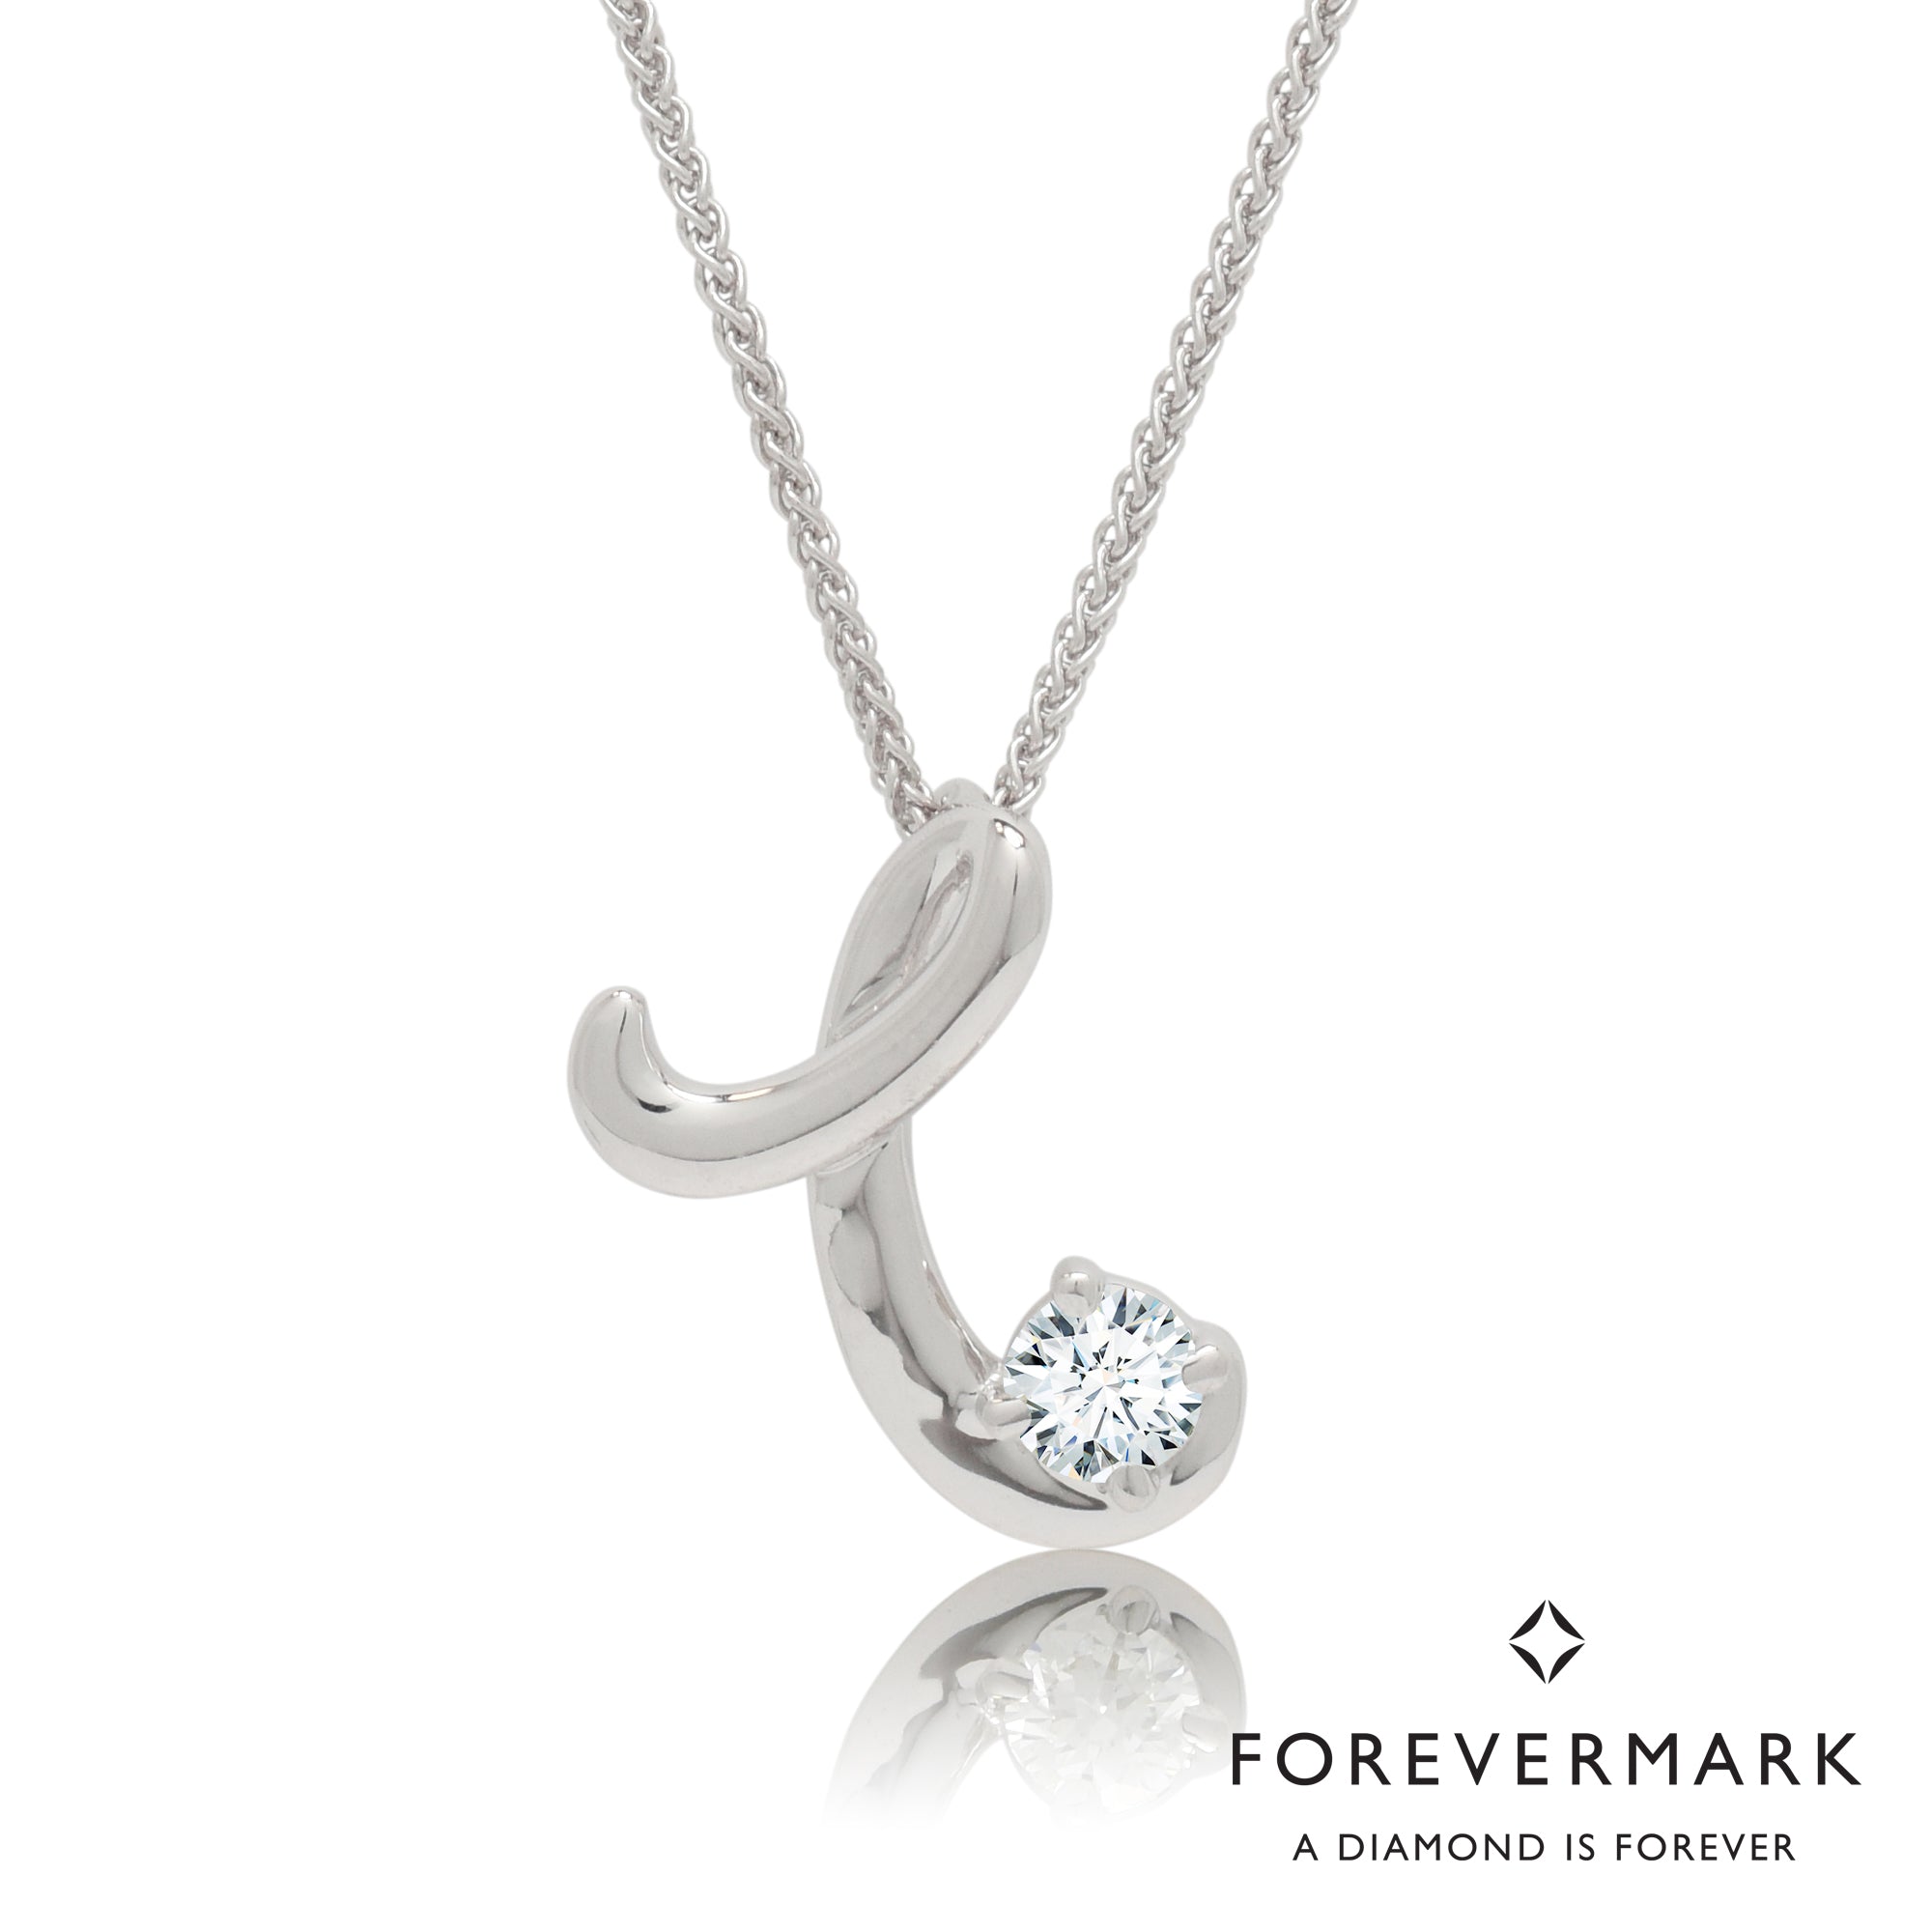 De Beers Forevermark T Initial Diamond Necklace in 18kt White Gold (1/10ct)